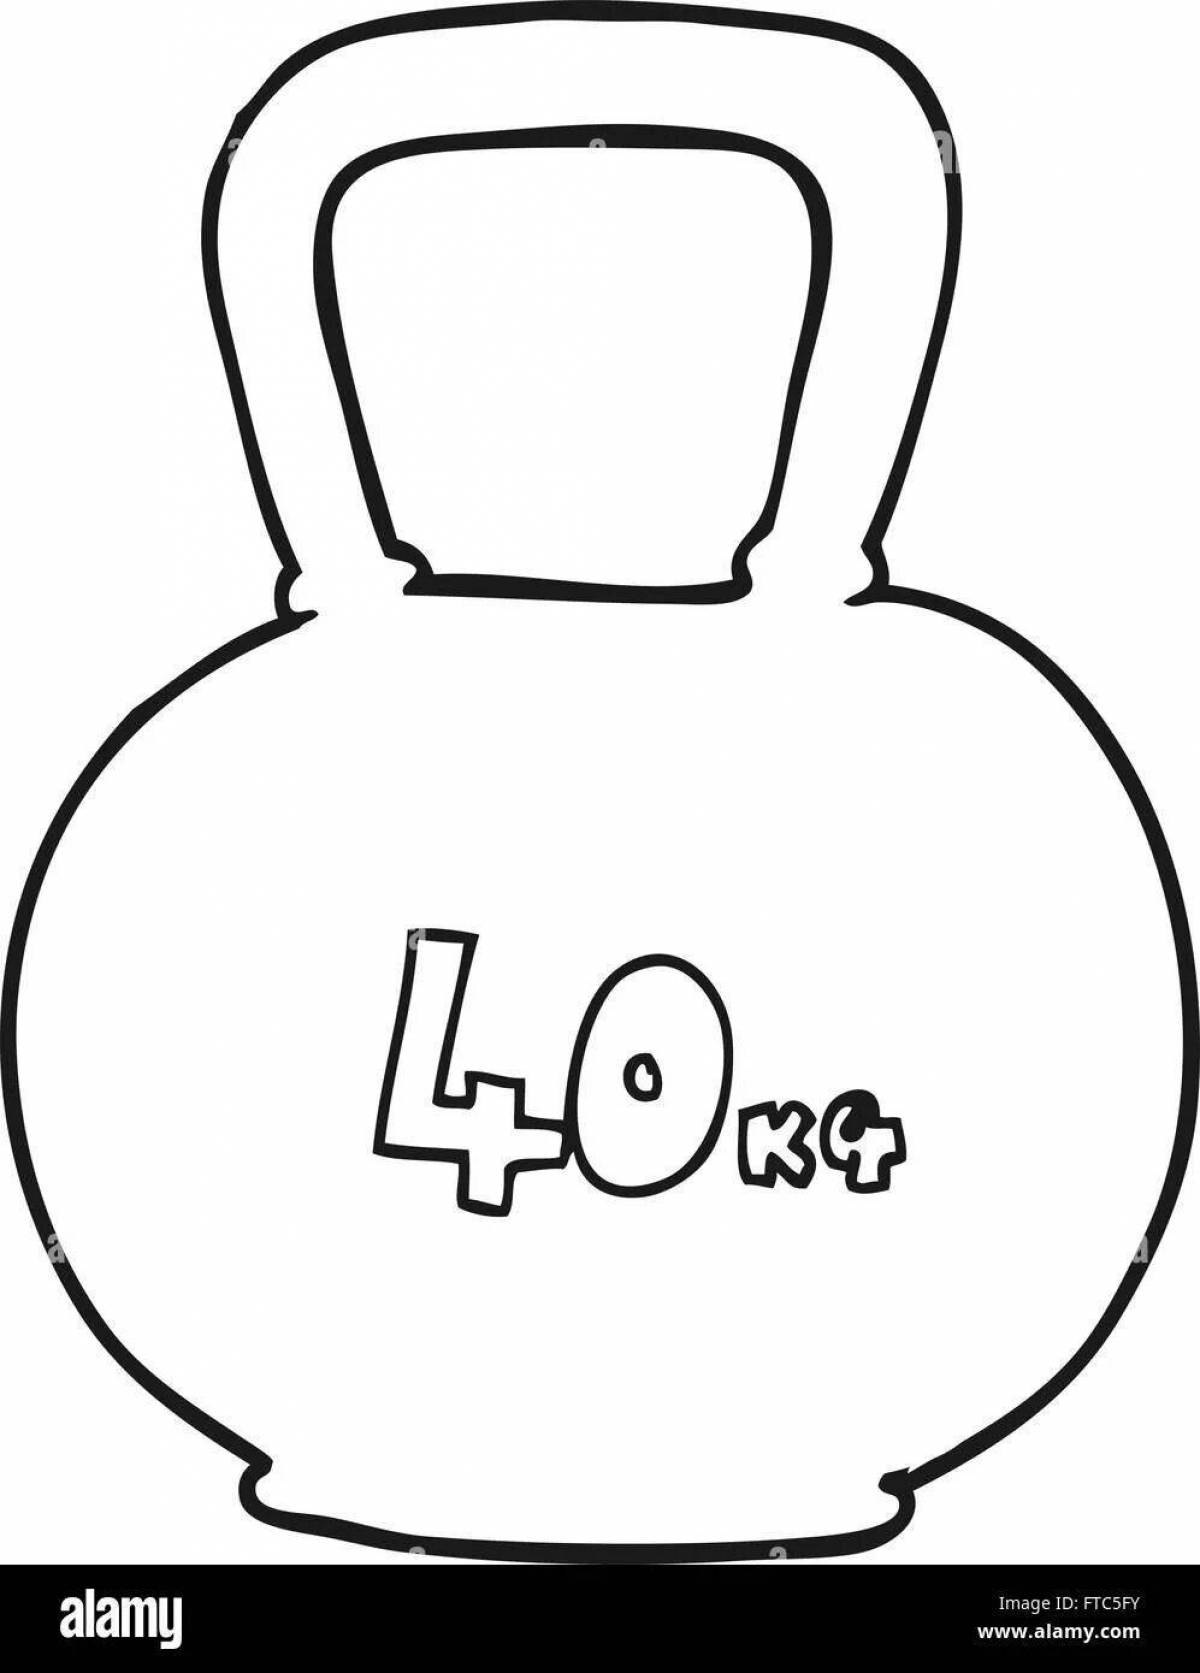 Amazing coloring pages with weights for babies